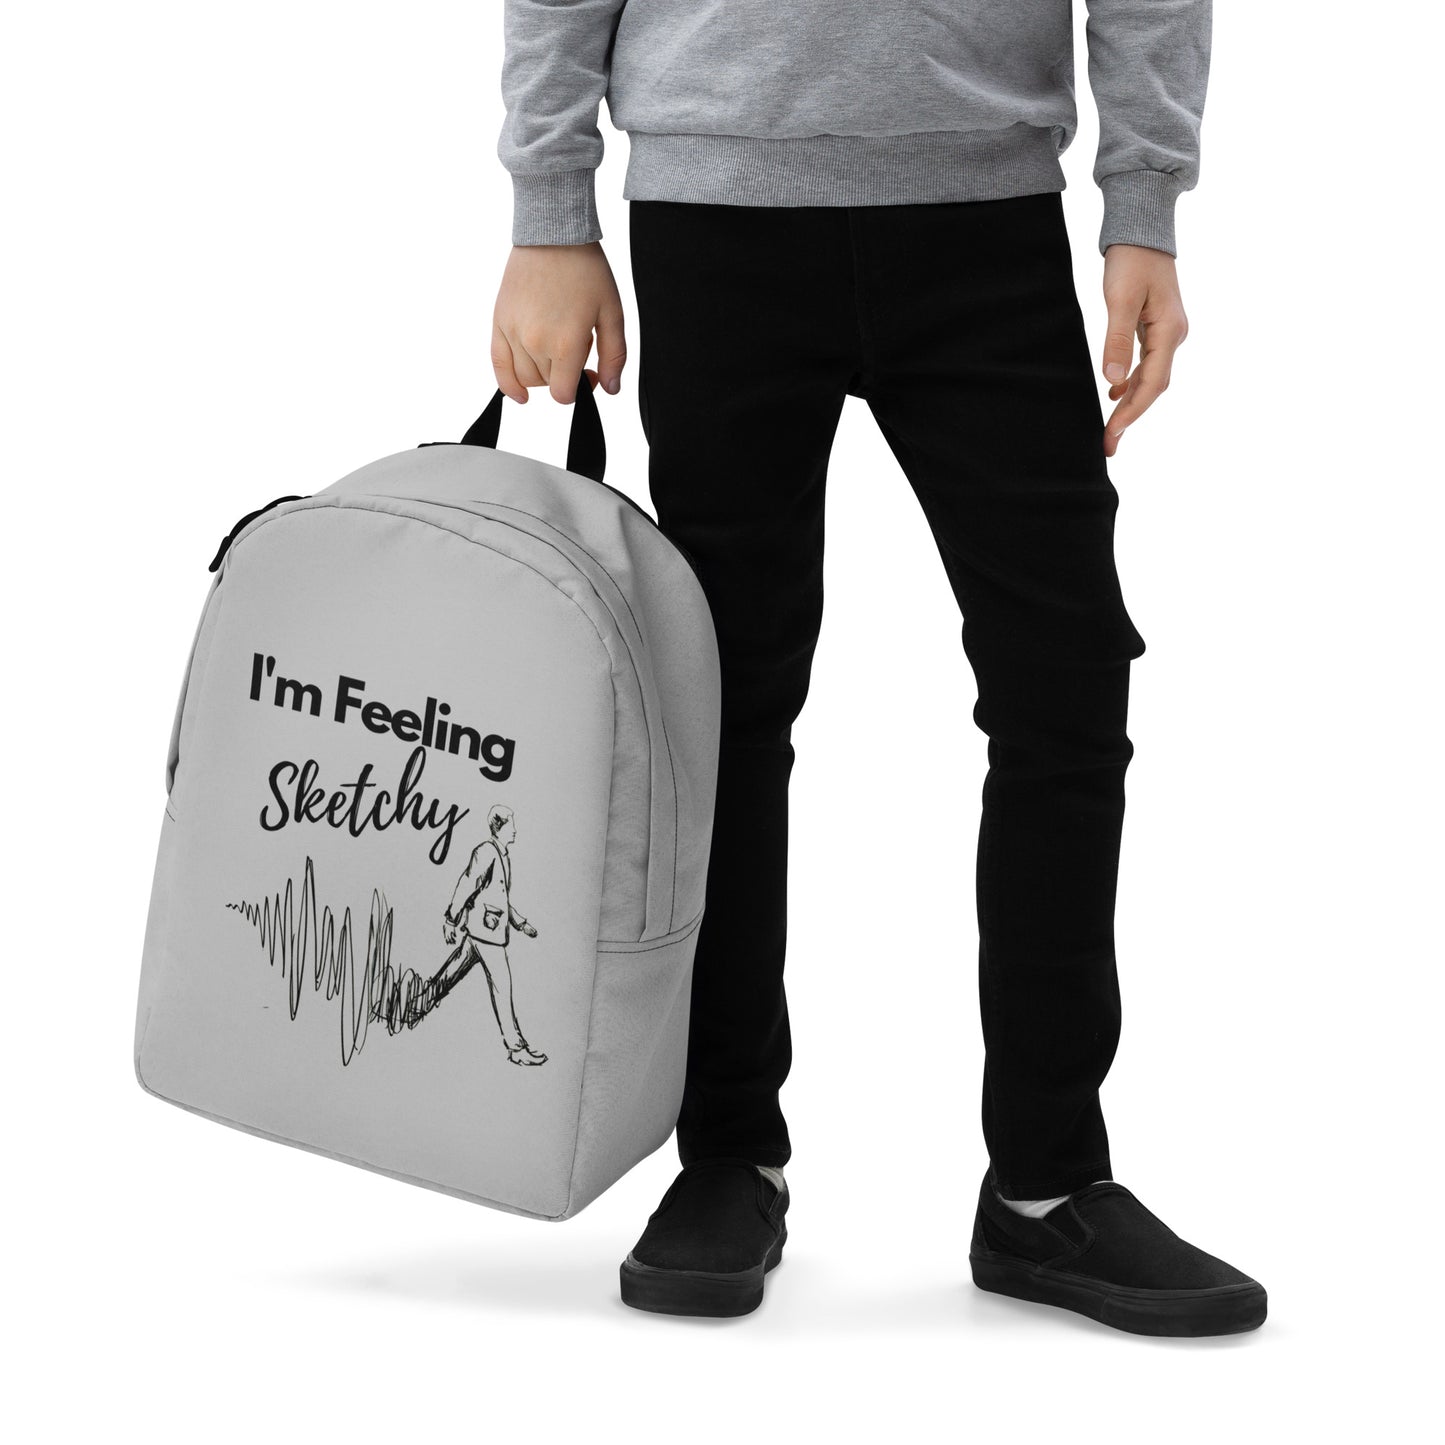 "I'm Feeling Sketchy" Artist Backpack for kids and adults